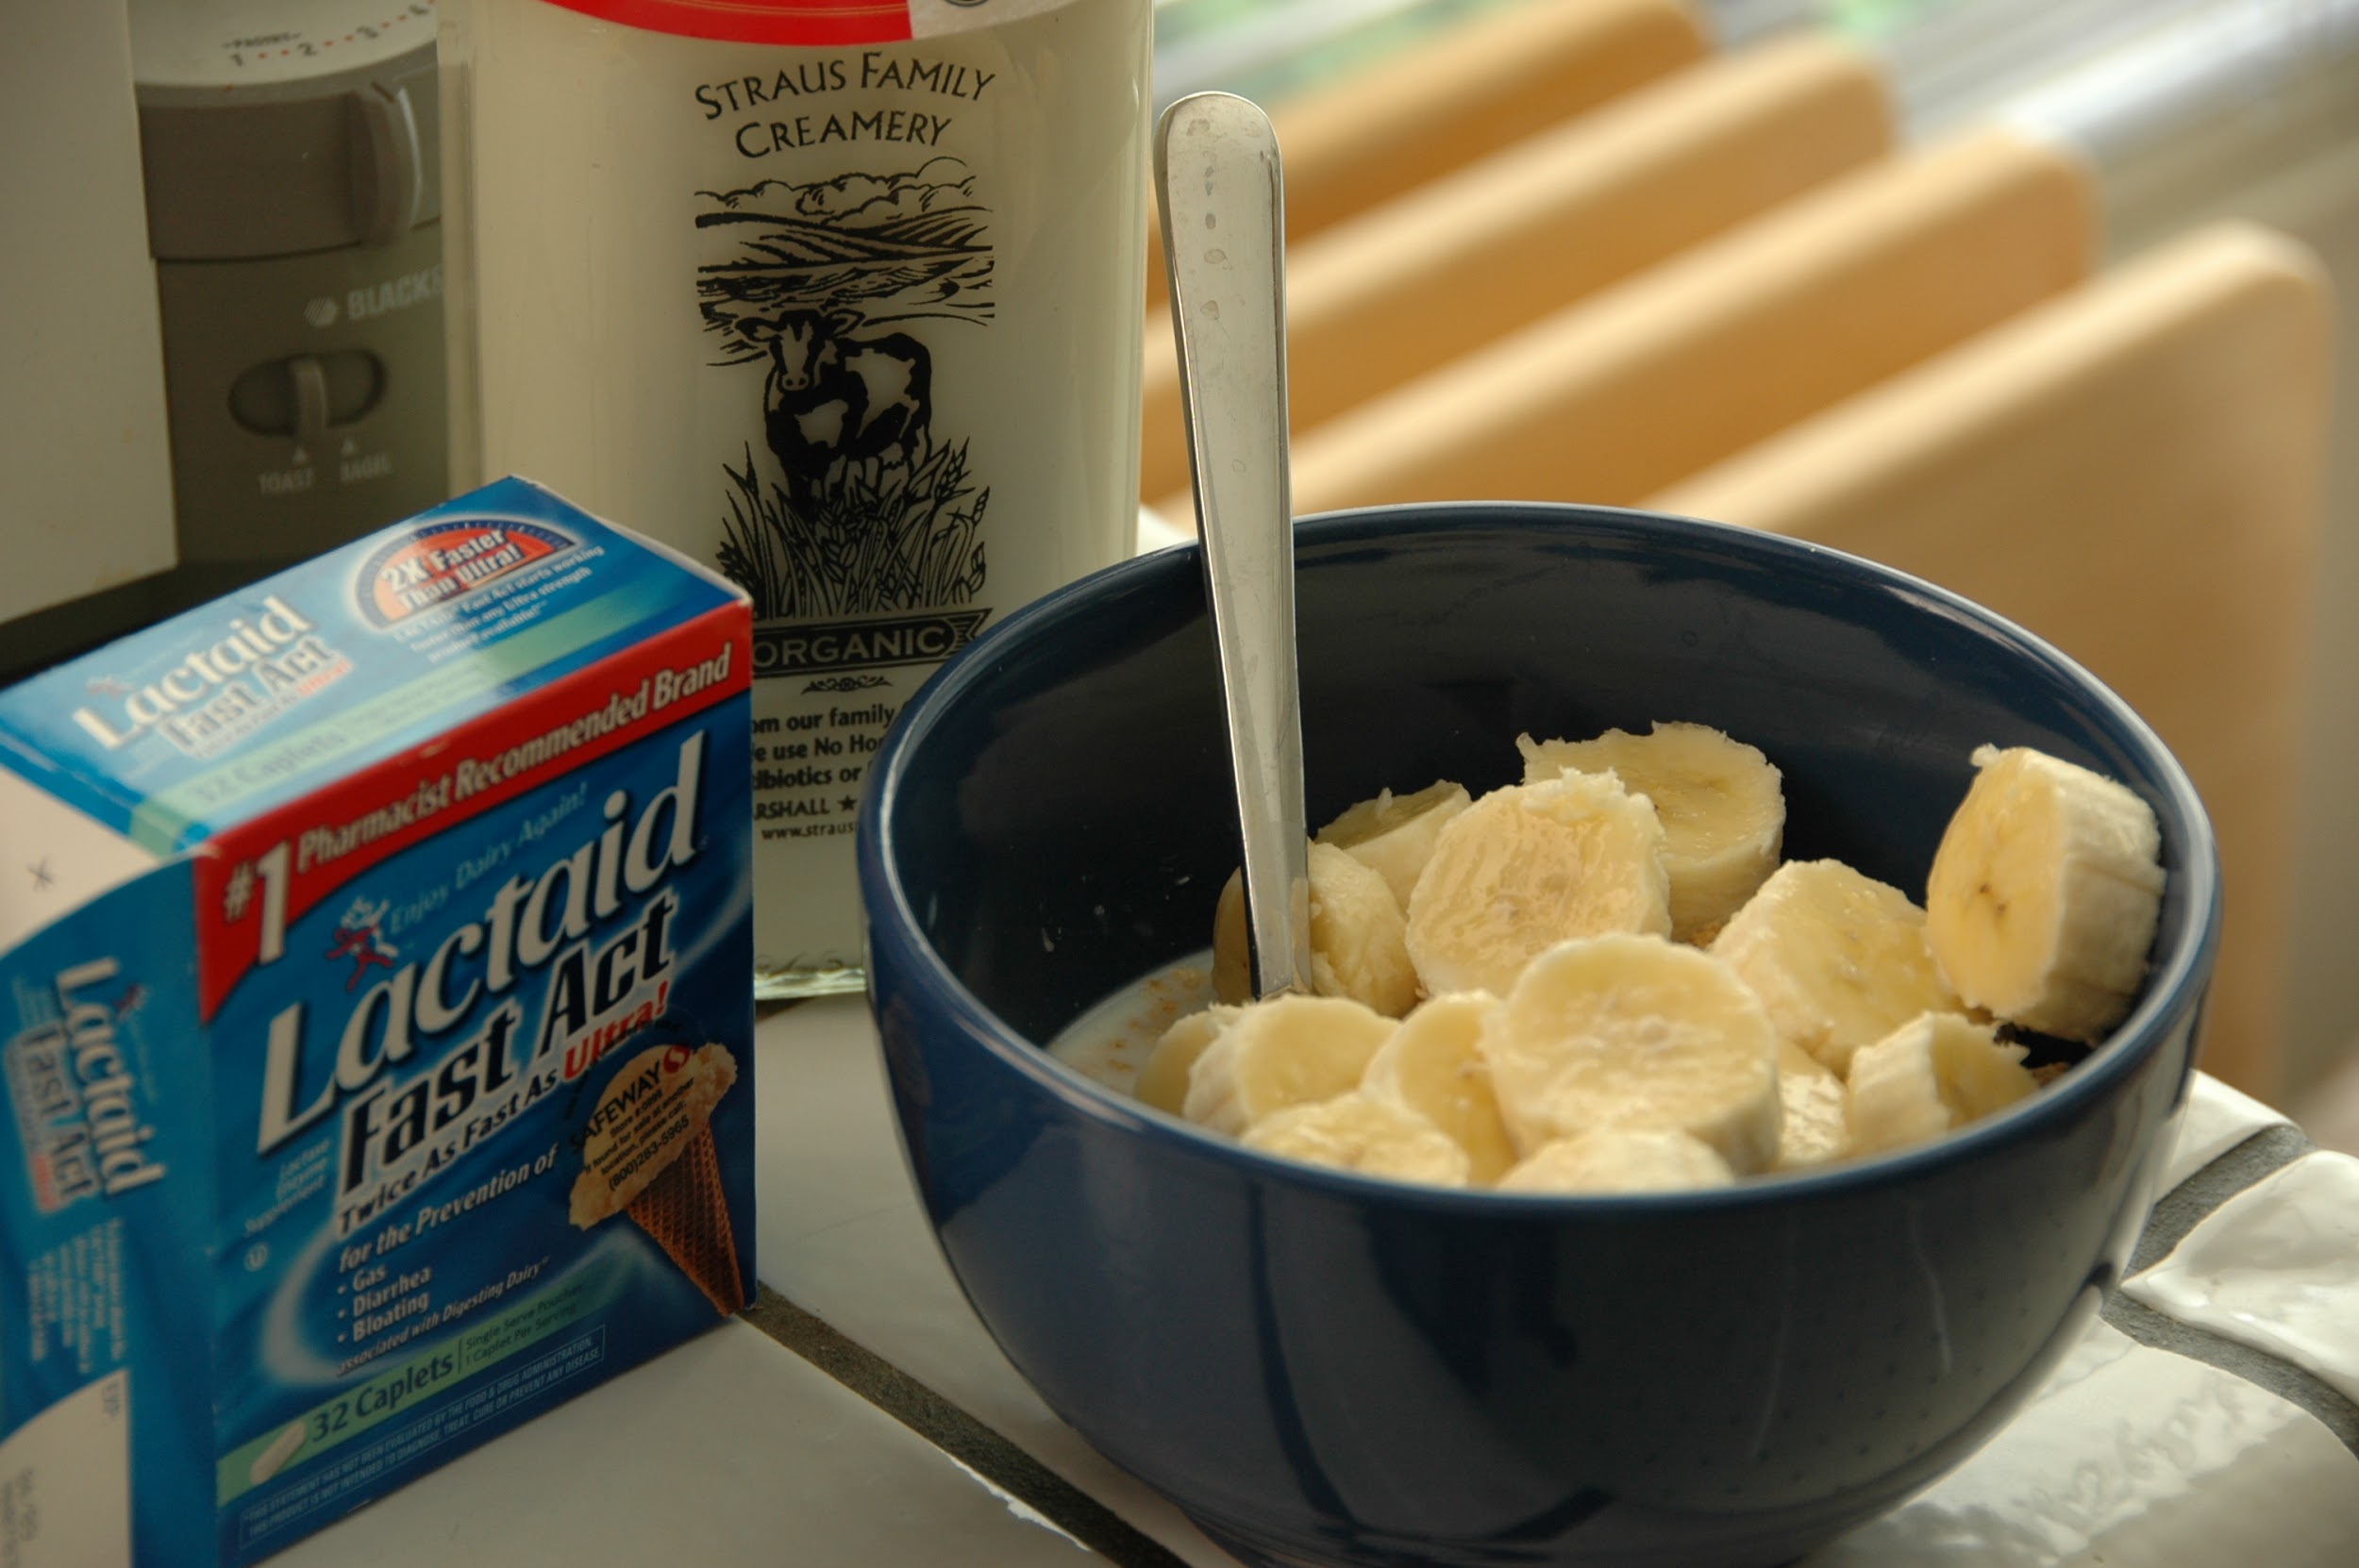 A photograph depicts a blue bowl of cereal, topped with sliced bananas. Behind it is a glass bottle of milk, and to the left is a box labeled "Lactaid: Fast Act."